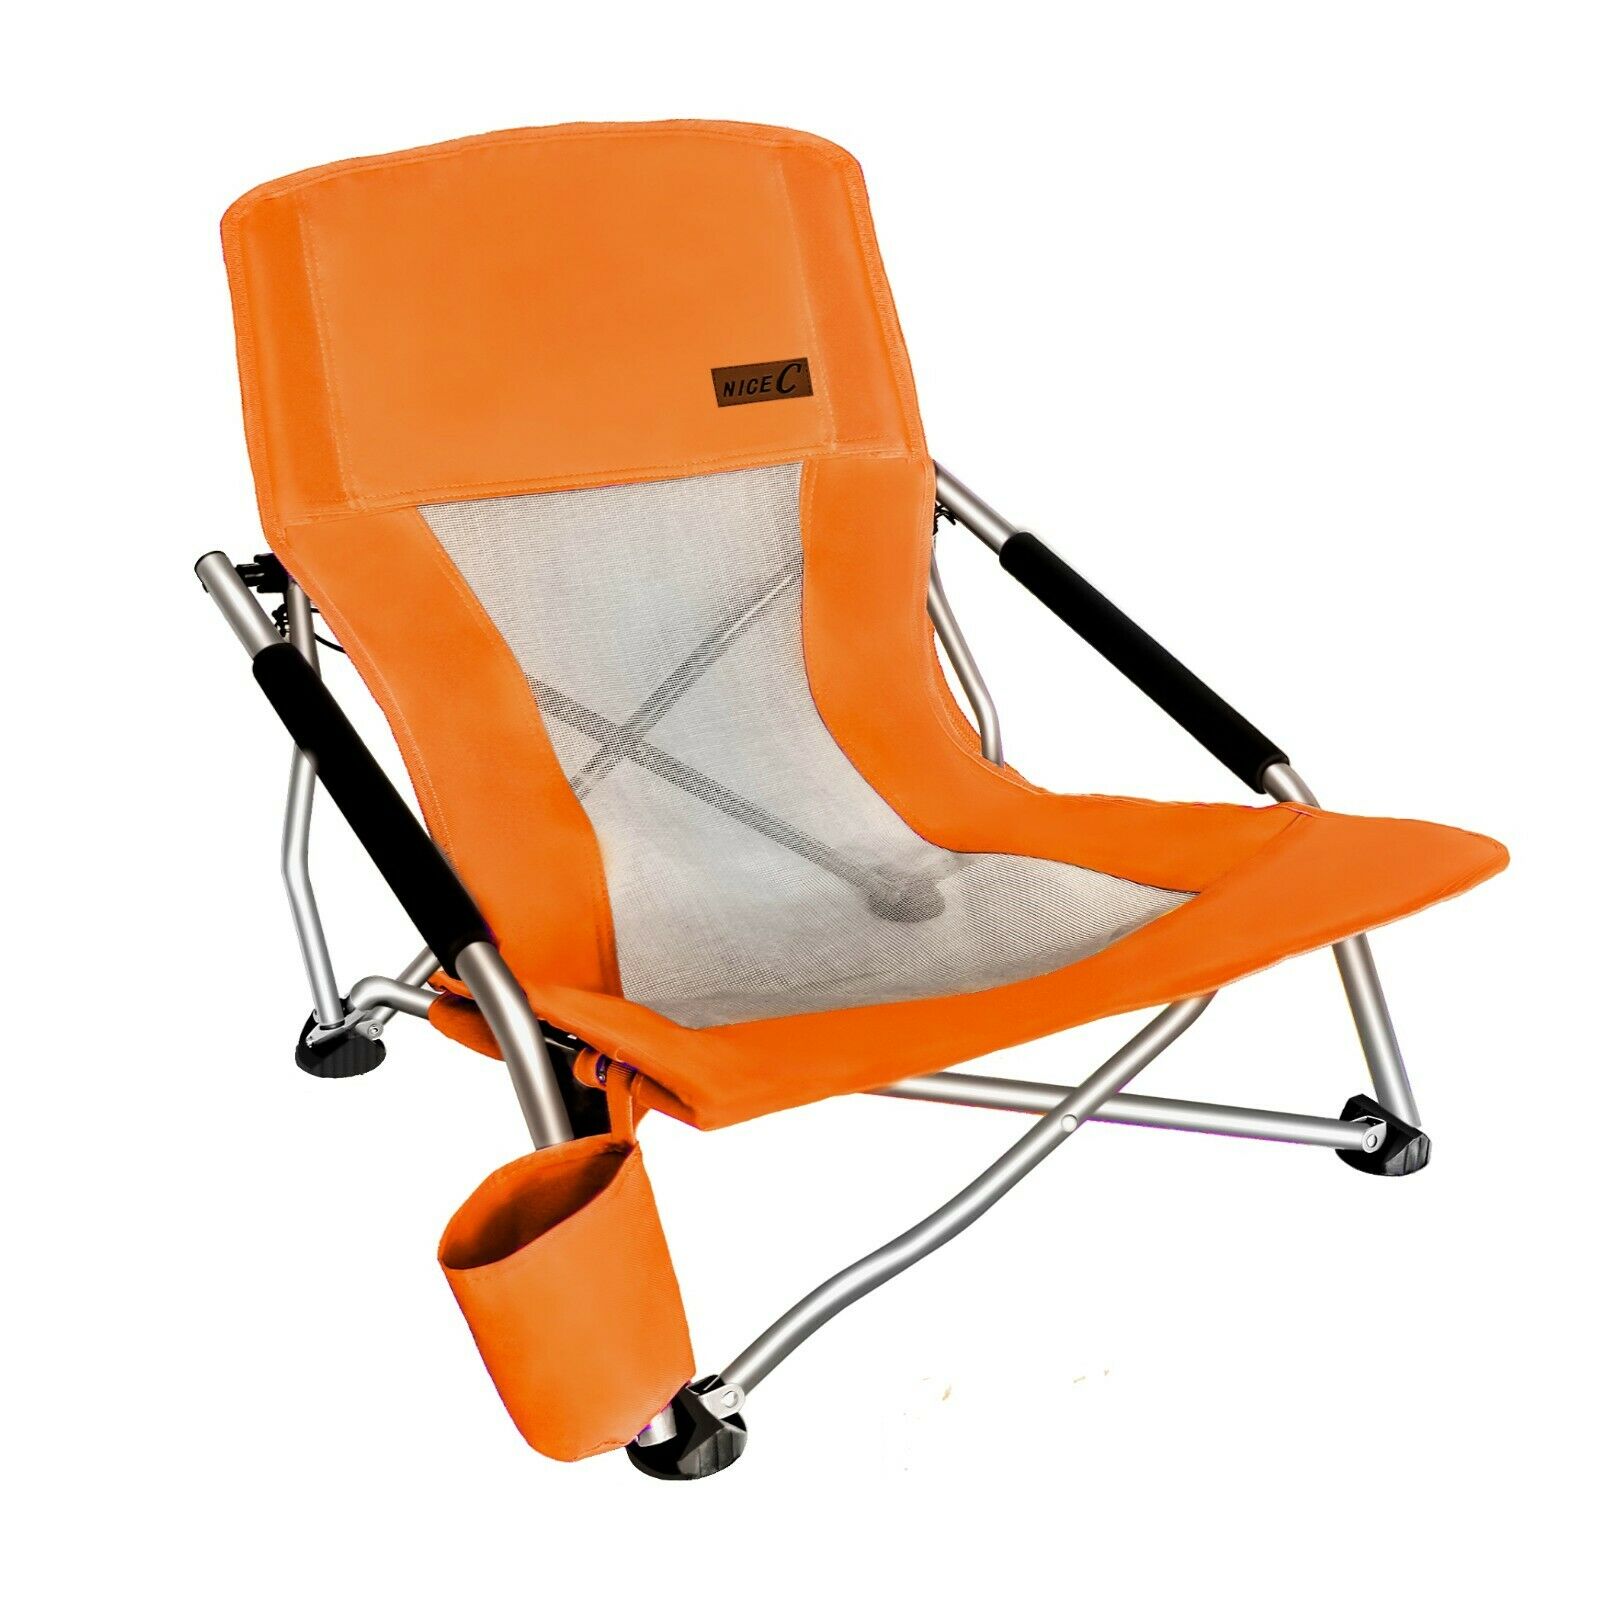 Folding Beach Chair With Cup Holder Portable Camping Ultralight Compact - Orange